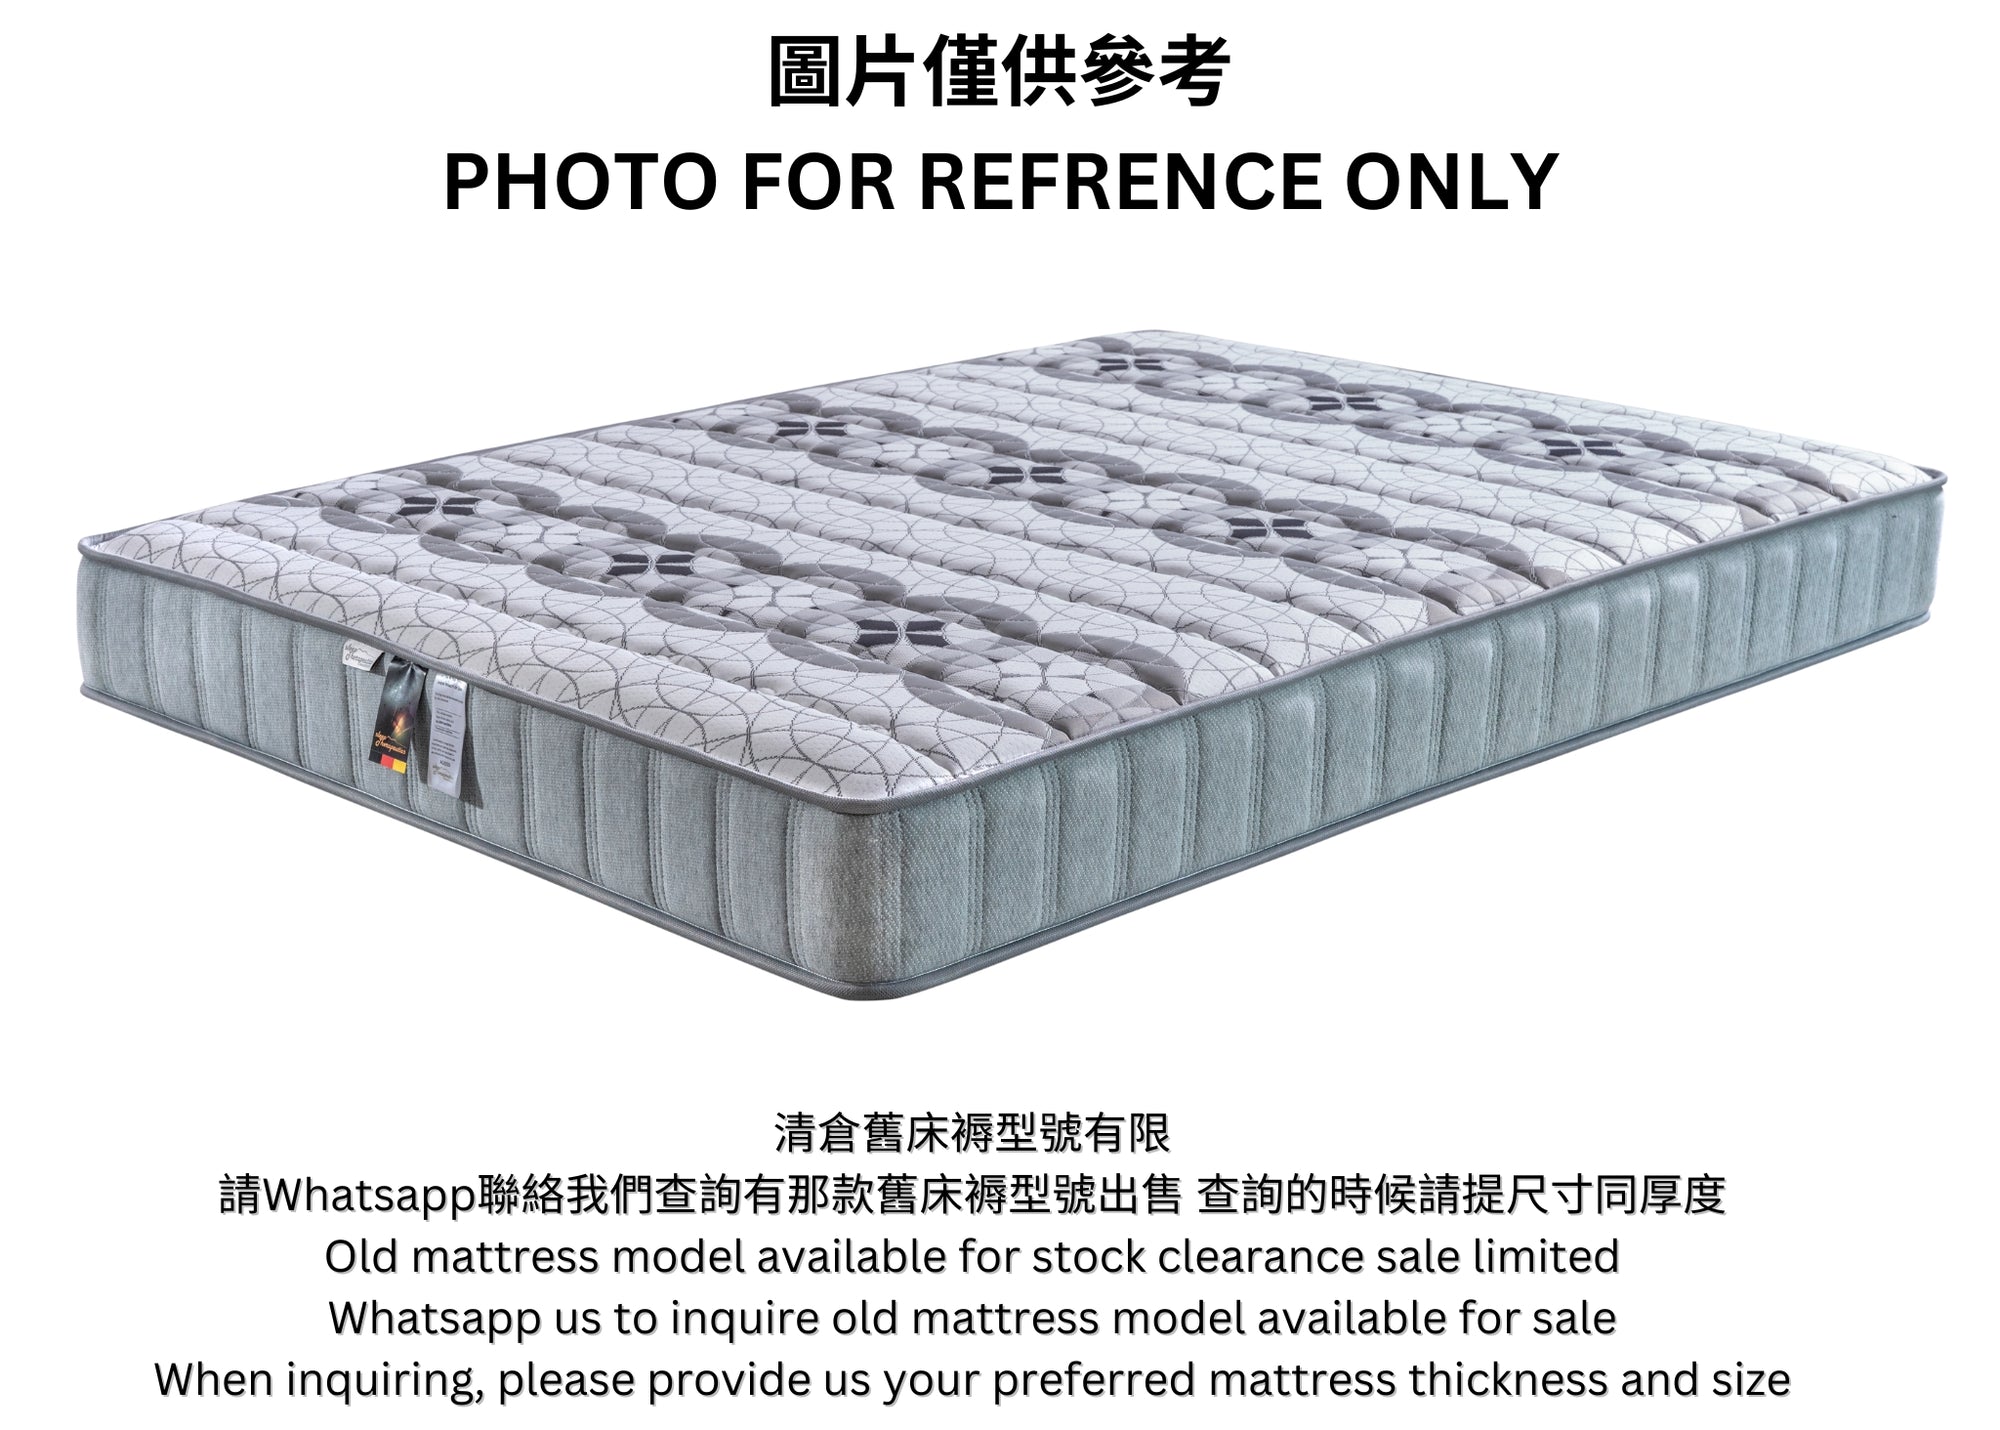 Spinal-Care Mattresses (Inventory Clearance Older Models)